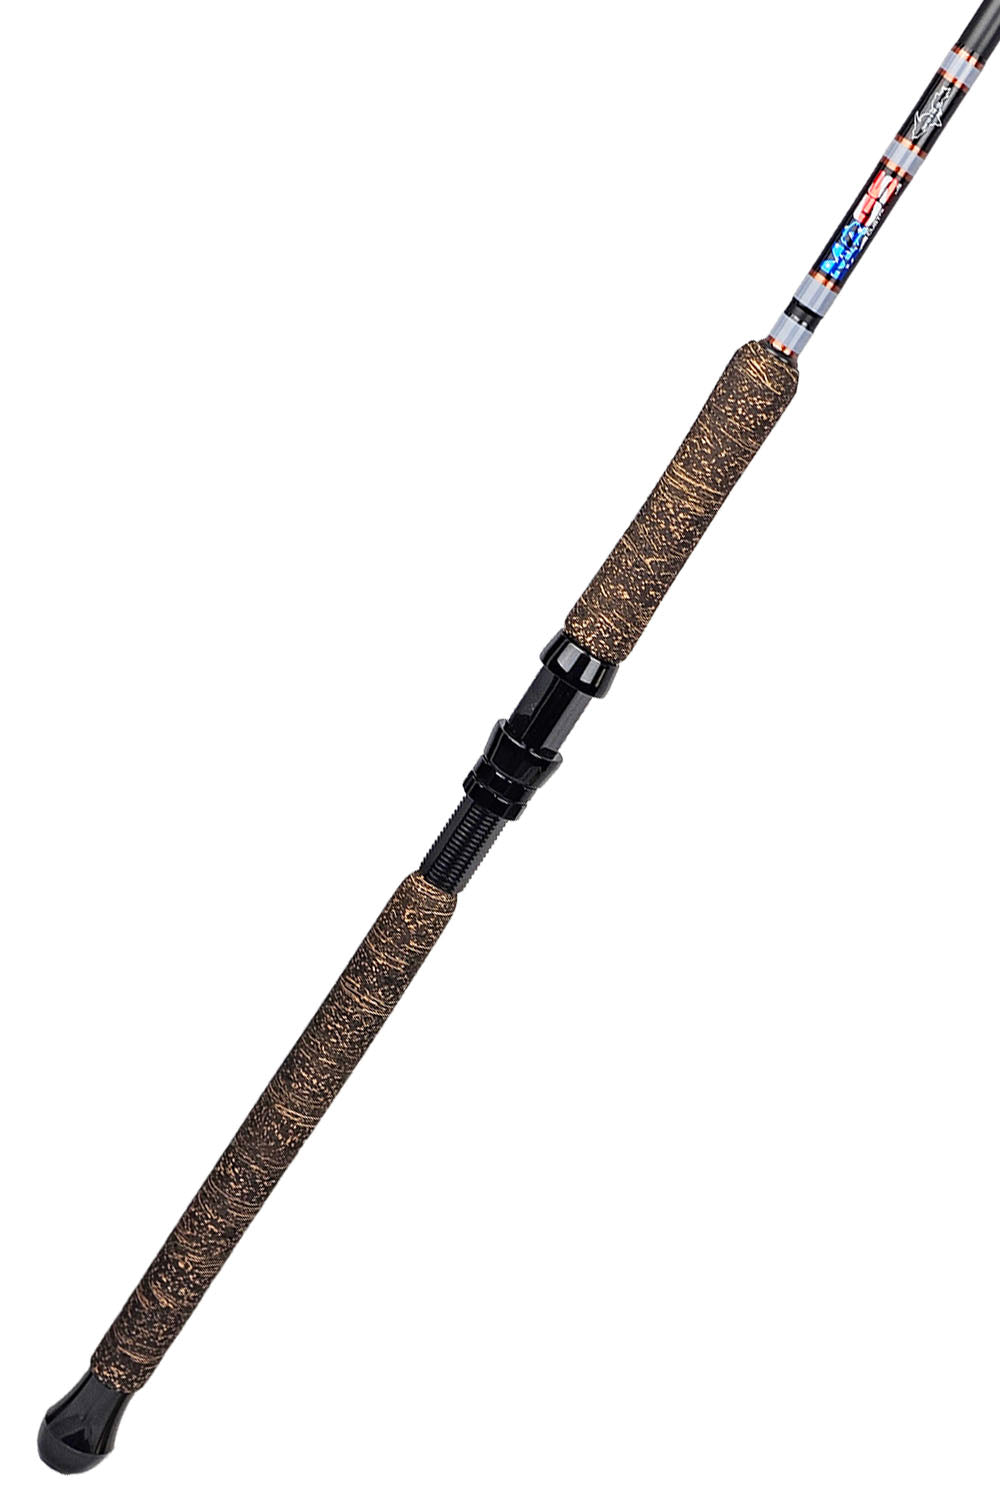 11' Fast Float Spinning Rod with Grey Wraps and Metallic Copper